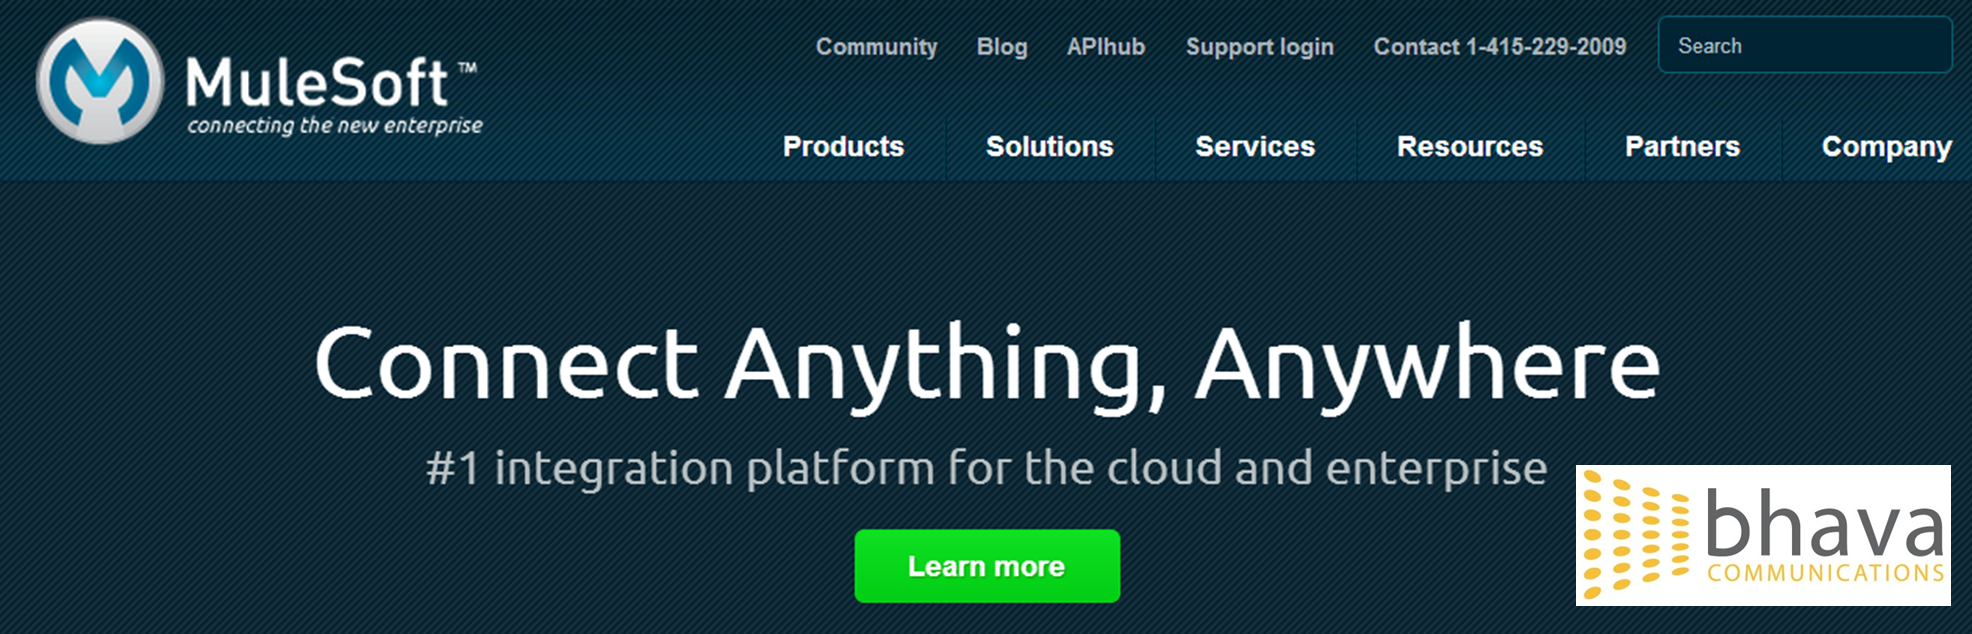 Much More than Middleware: MuleSoft’s Product and Series E Funding Launch- Logo